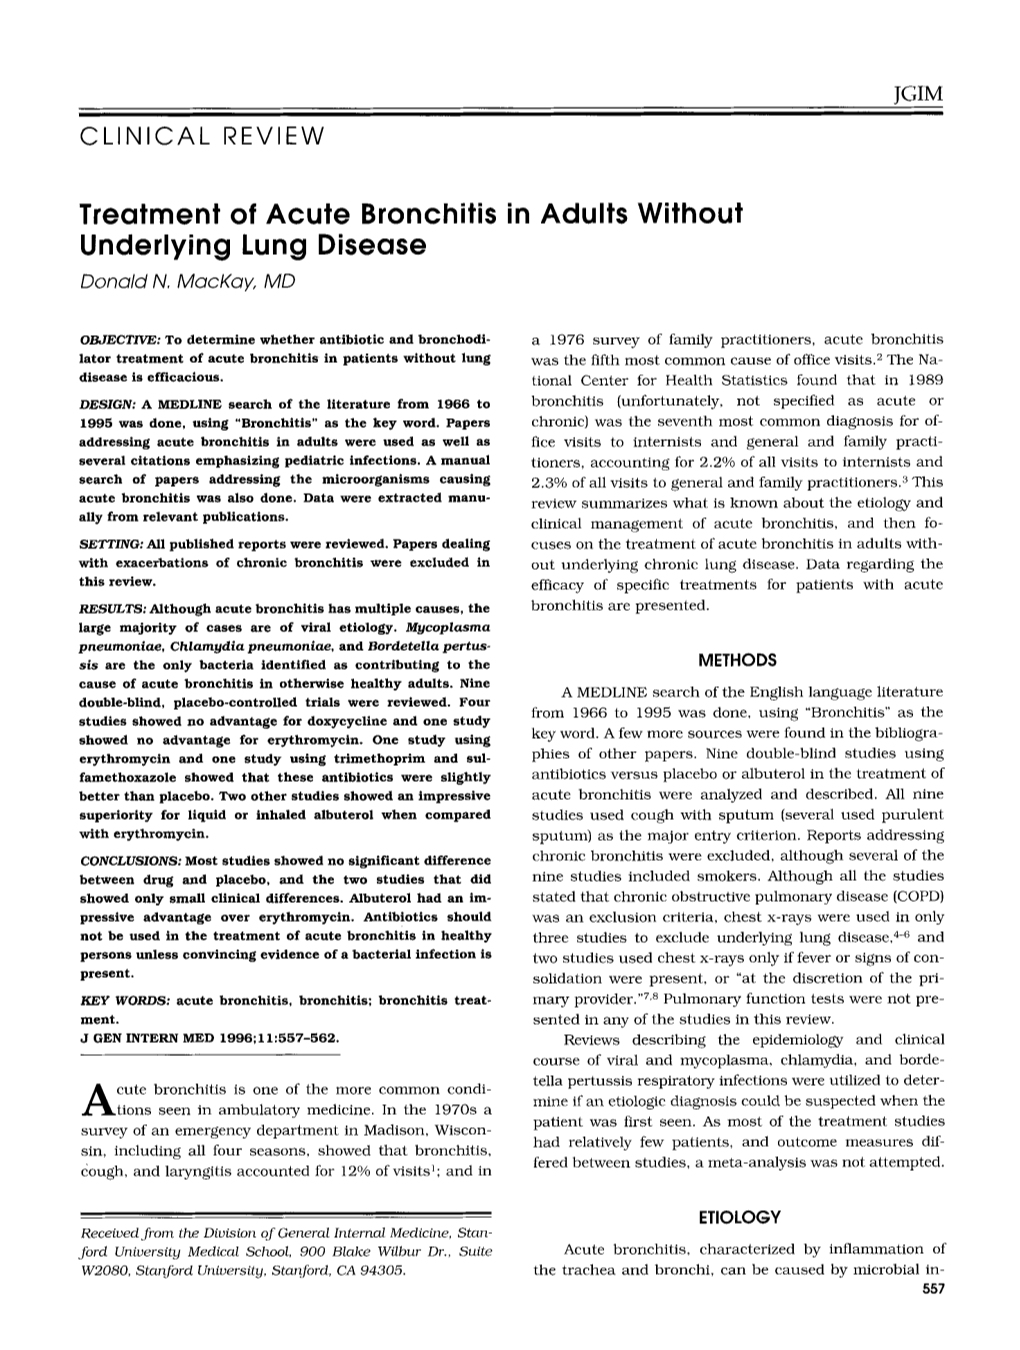 Treatment of Acute Bronchitis in Adults Without Underlying Lung Disease Donald N